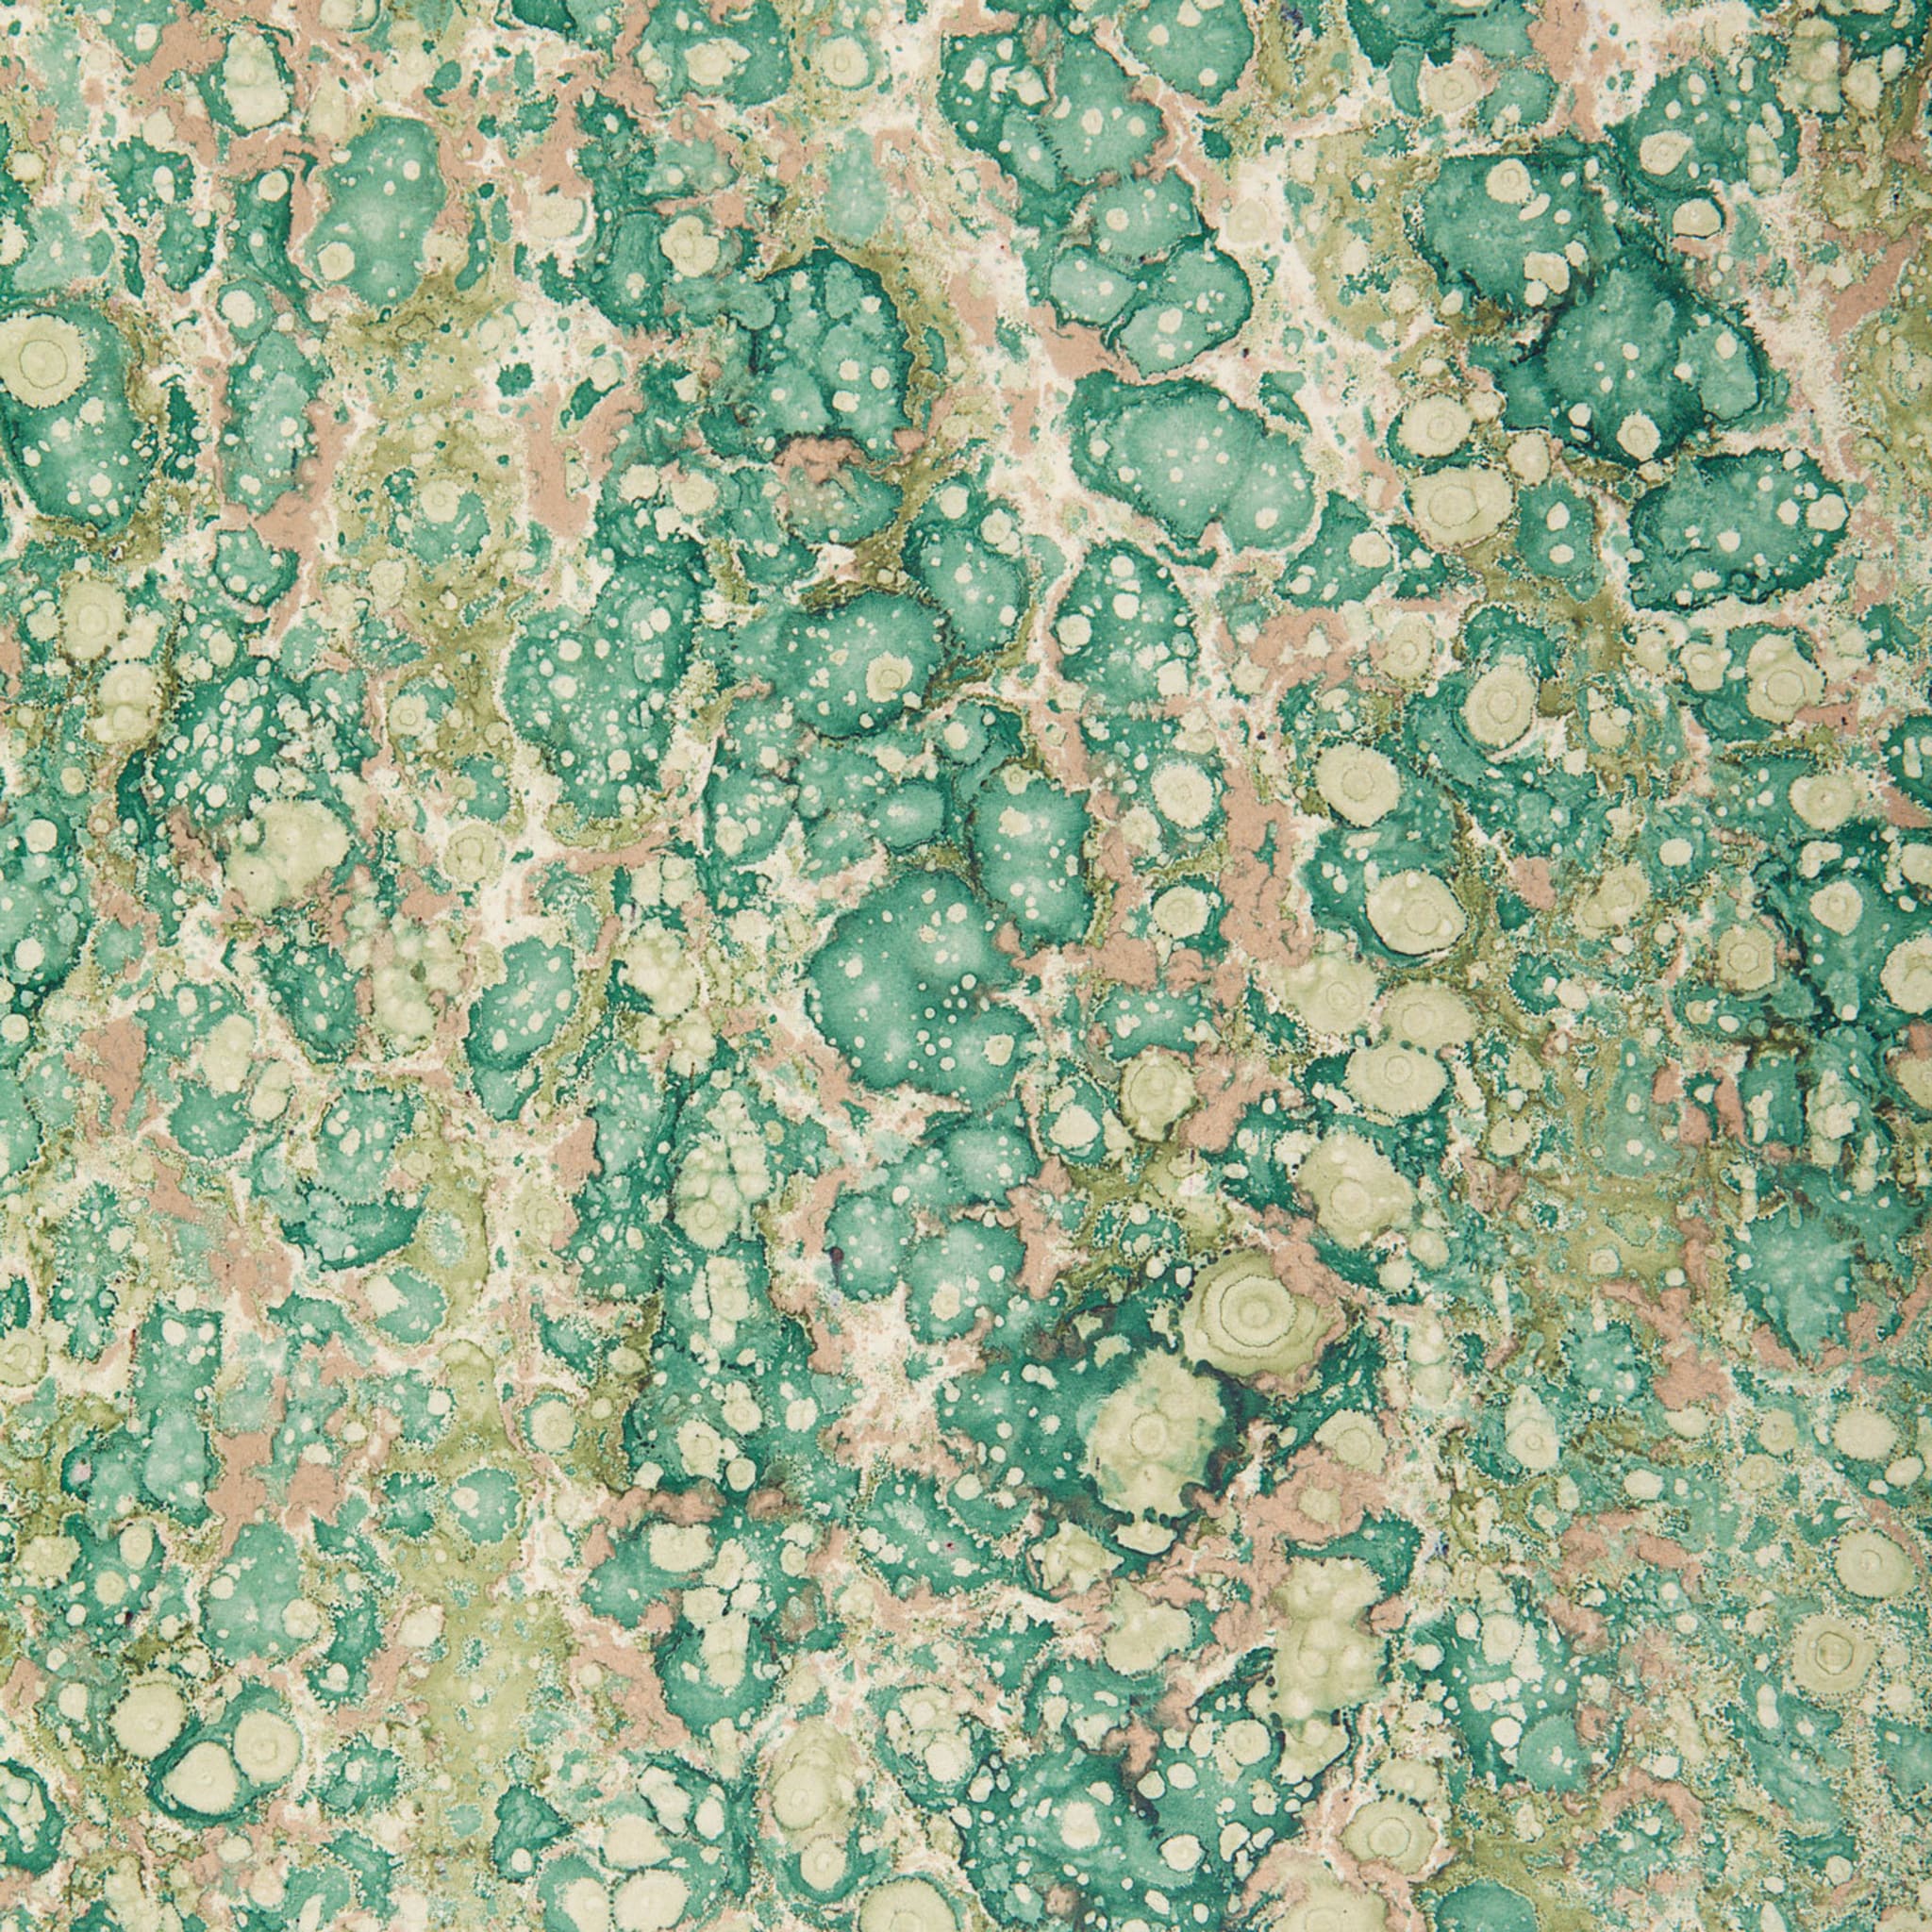 Blue and Green Marble Paper - Alternative view 3